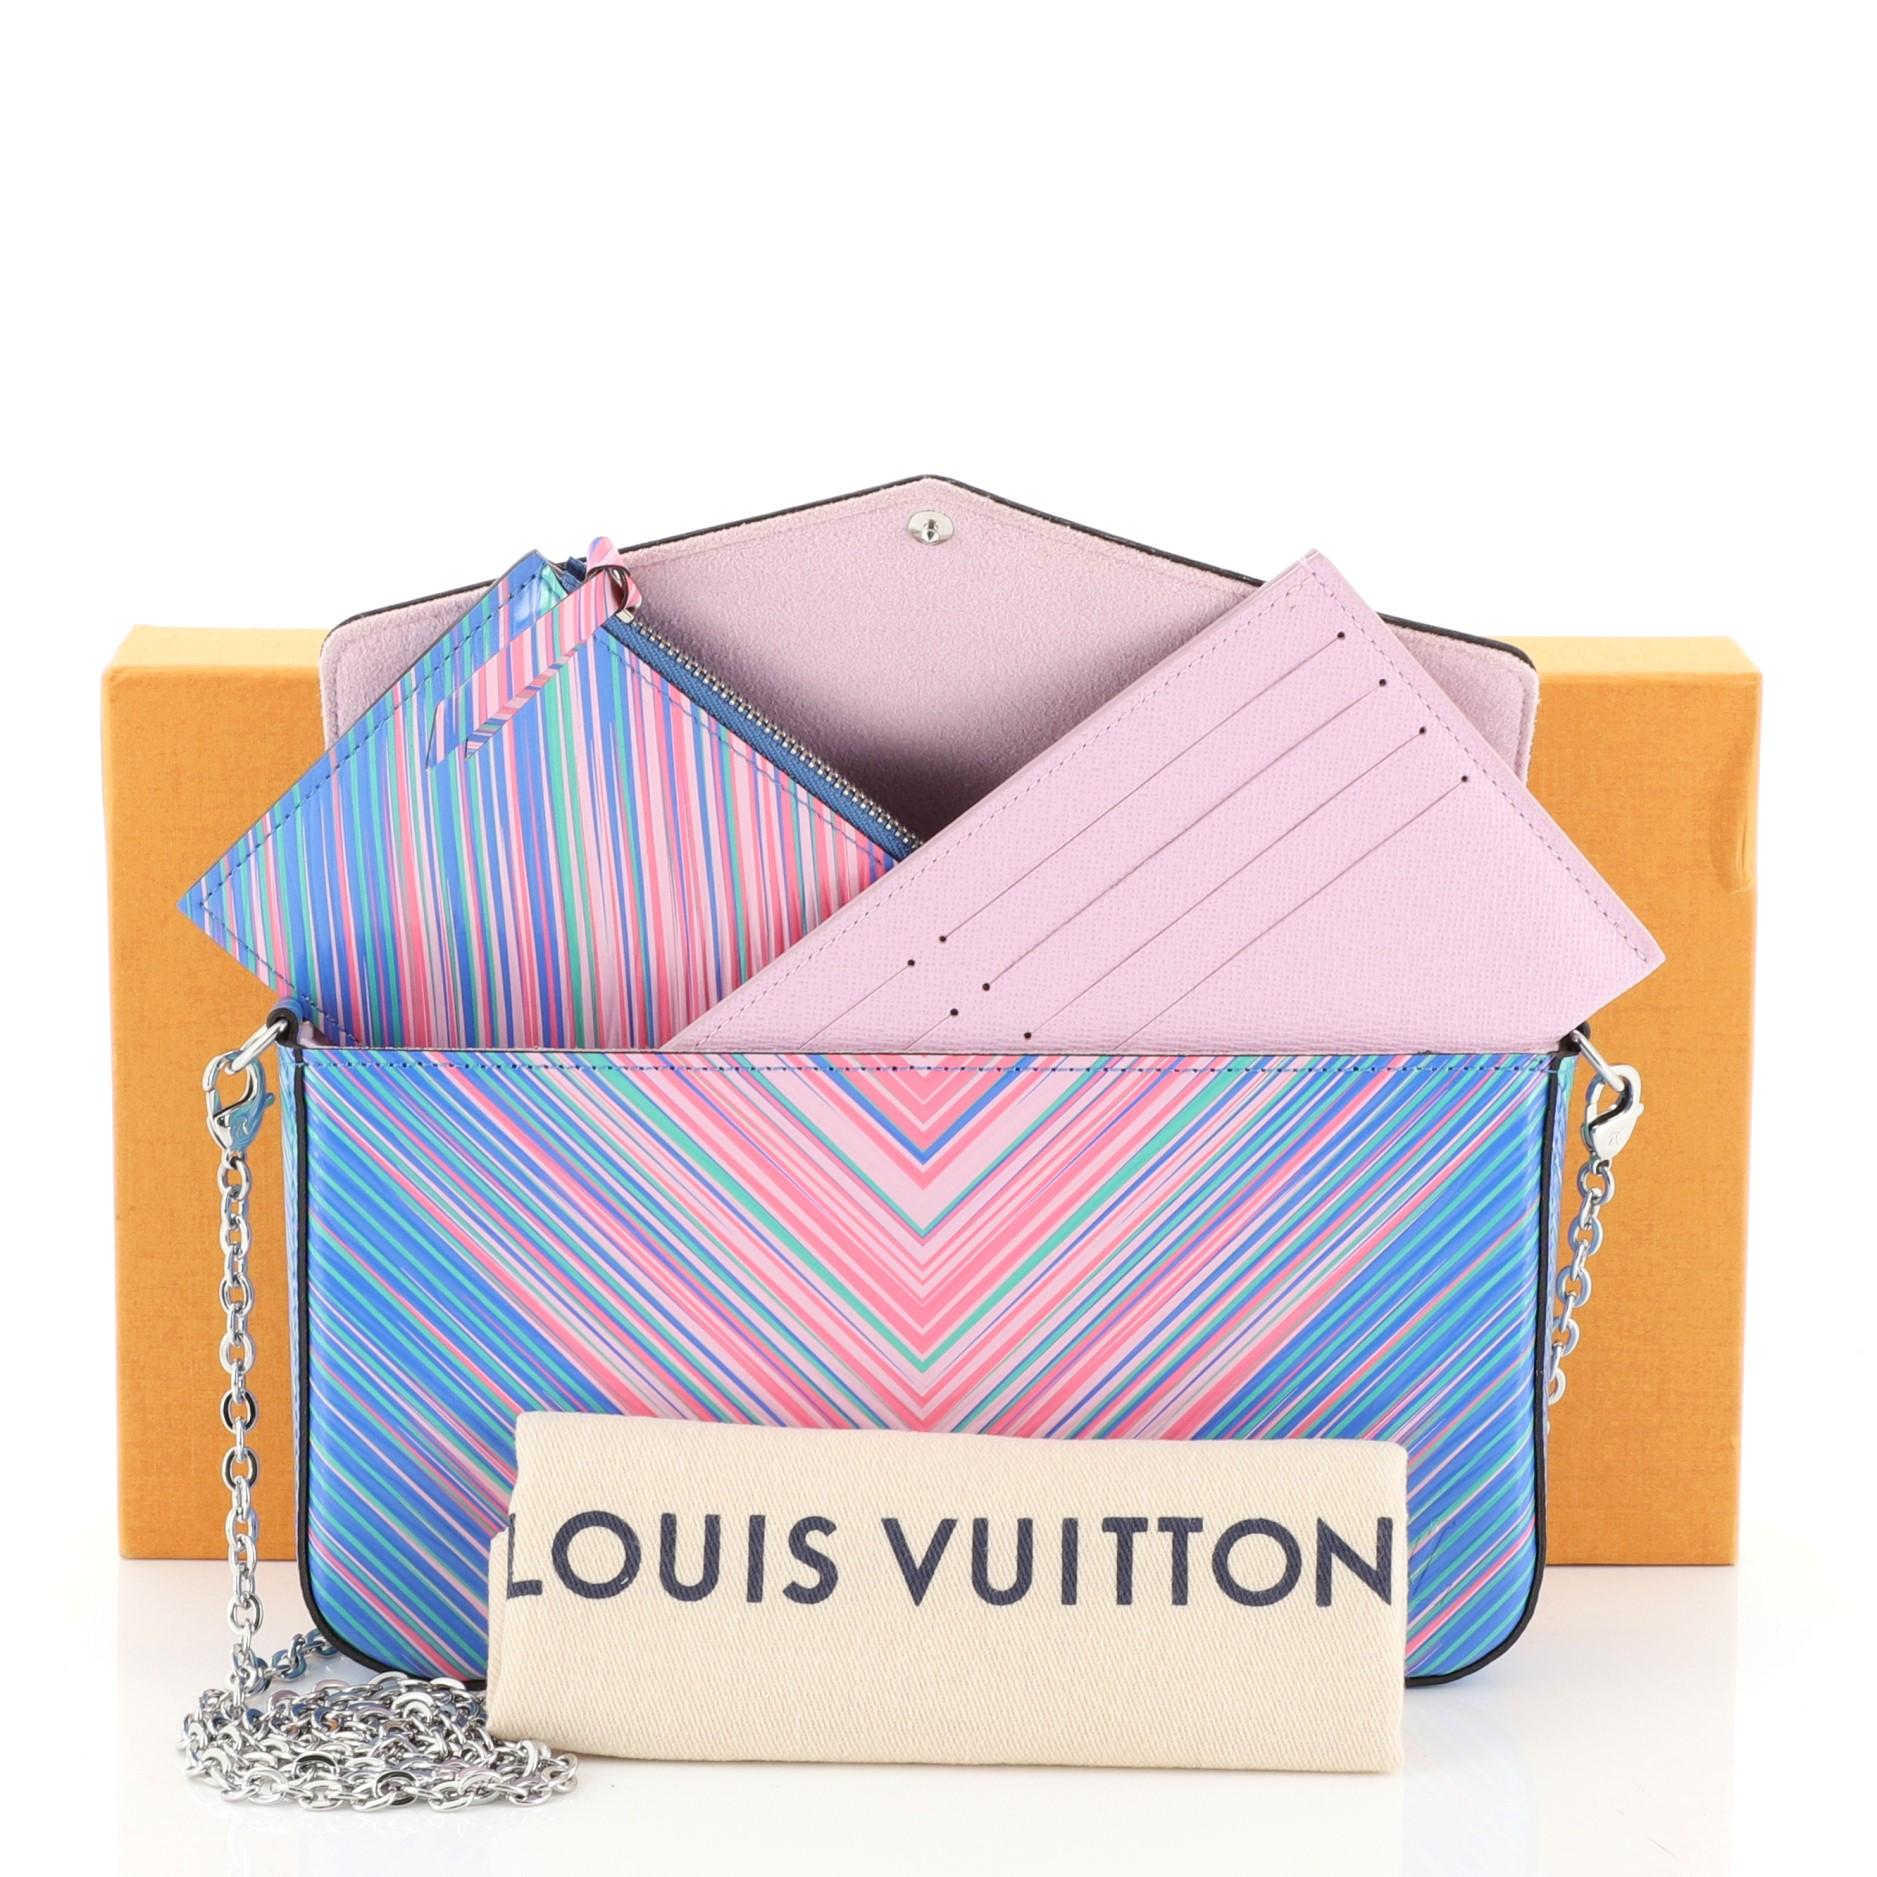 This Louis Vuitton Felicie Pochette Limited Edition Tropical Epi Leather, crafted from tropical printed epi leather, features detachable chain-link strap, and silver-tone hardware. Its press stud closure opens to a purple microfiber interior.